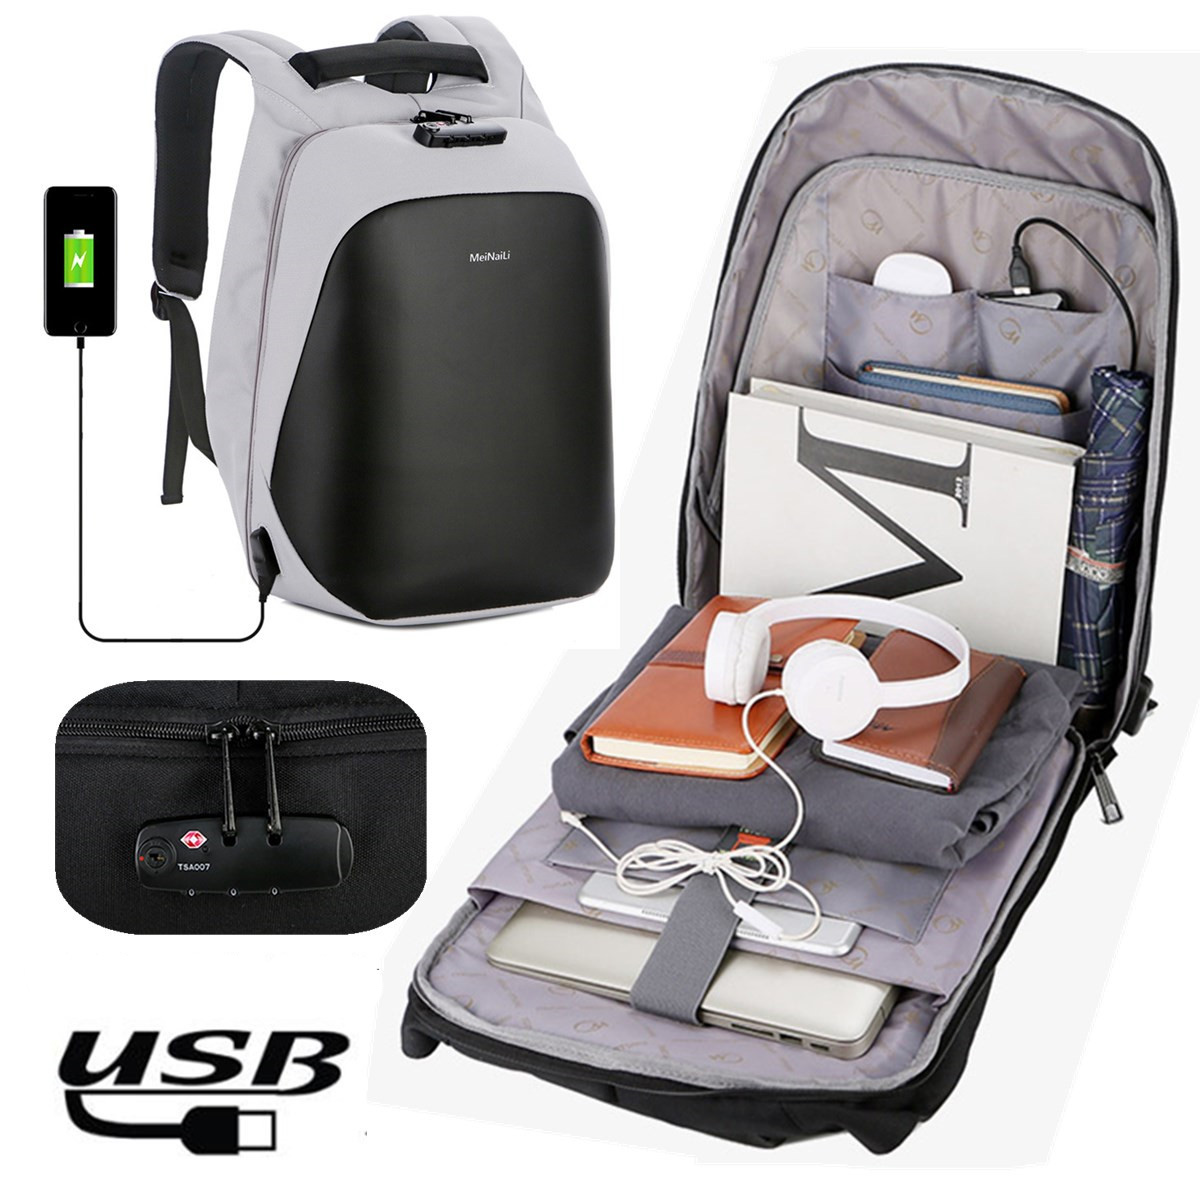 

Anti Theft Code Lock Laptop Backpack Travel Bag With USB Charging Port For Laptop Notebook Tablet PC Under 15.6 Inch